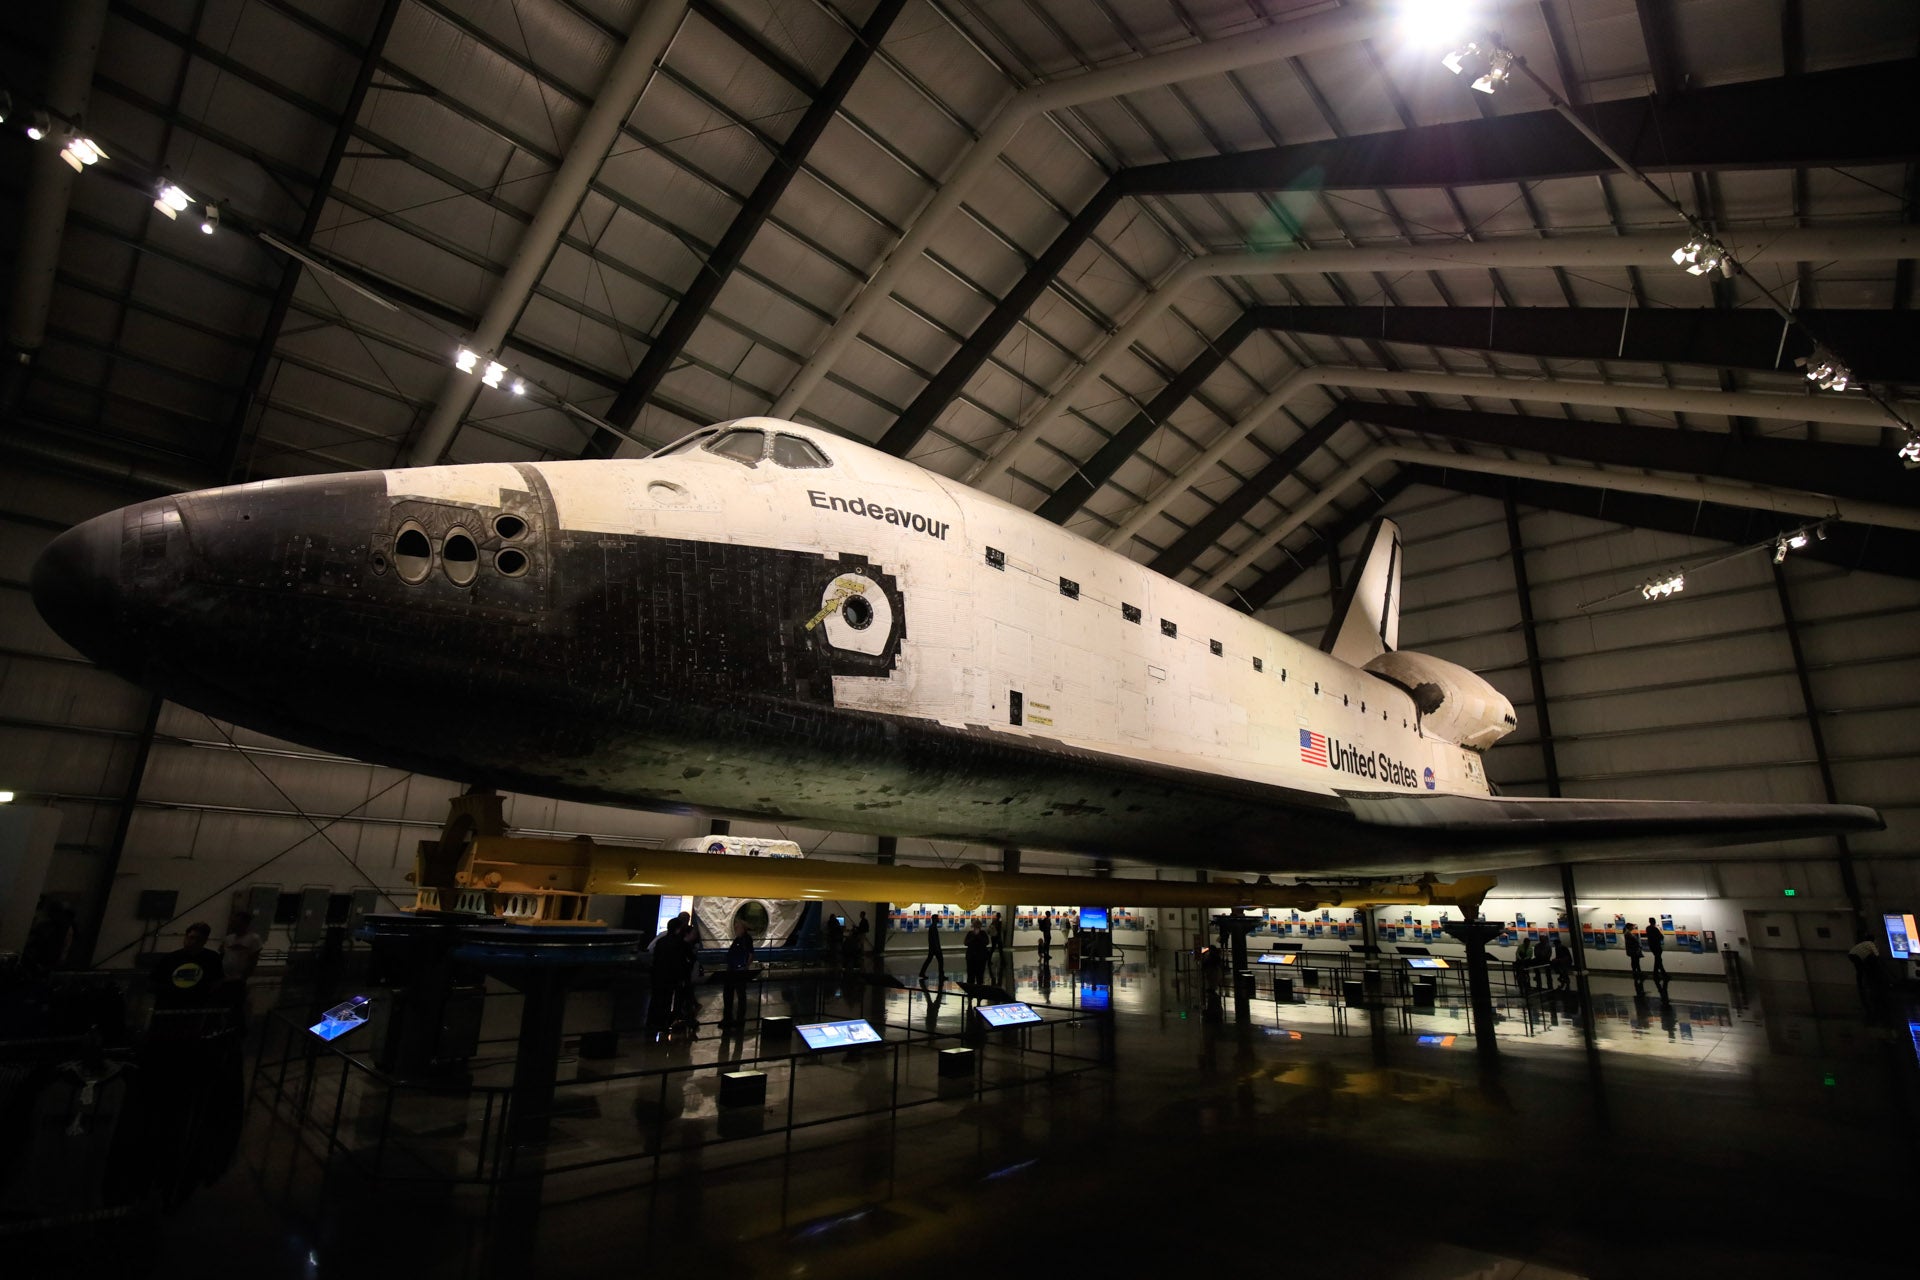 what was the space shuttle originally designed for and how many astronauts can the space shuttle carry